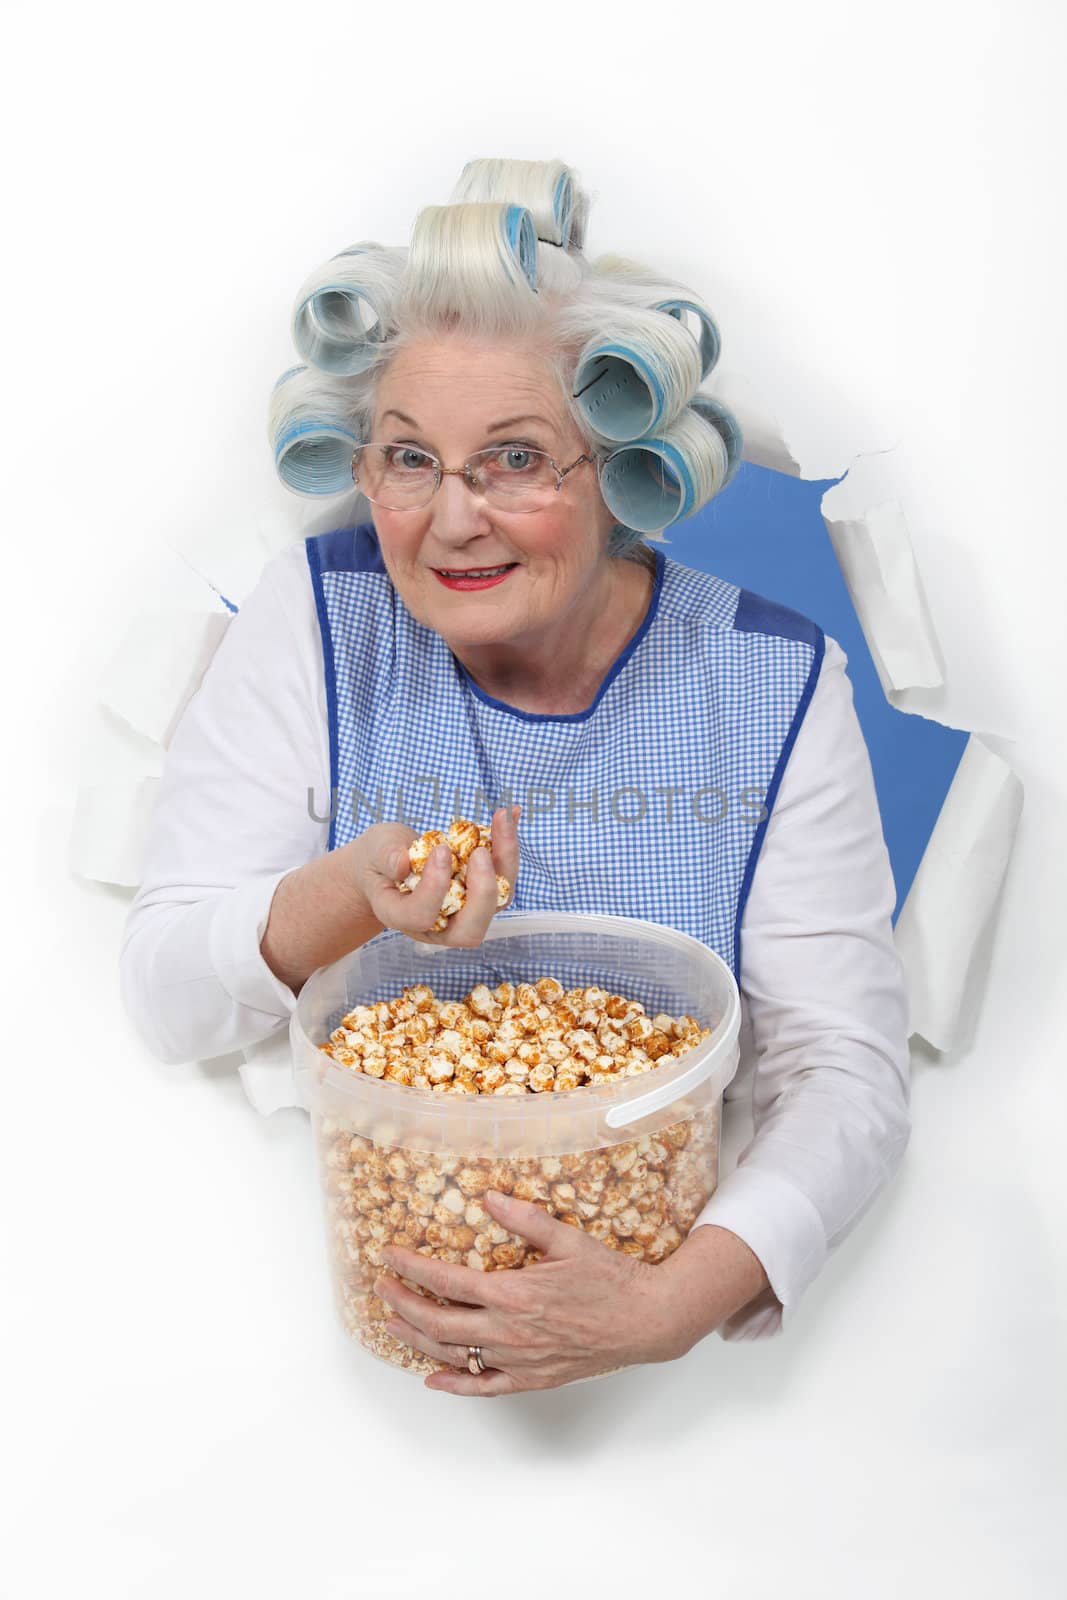 senior woman with curlers in her hair eating popcorn by phovoir